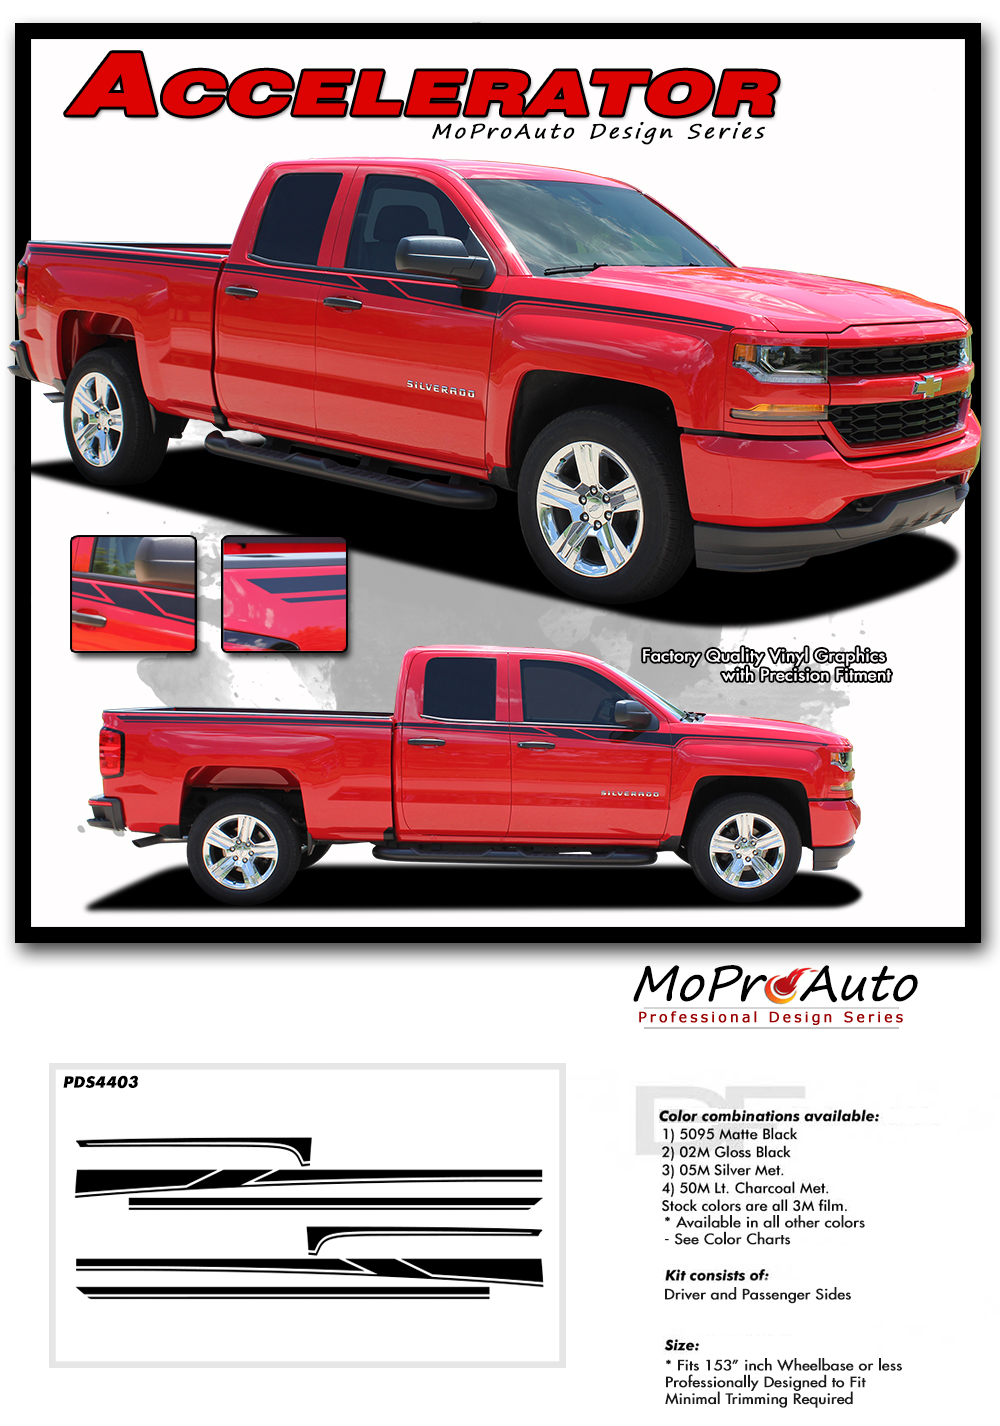 2014 2015 2016 2017 2018 ACCELERATOR - Special Edition Style Chevy Silverado Vinyl Graphics, Stripes and Decals Kit by MoProAuto